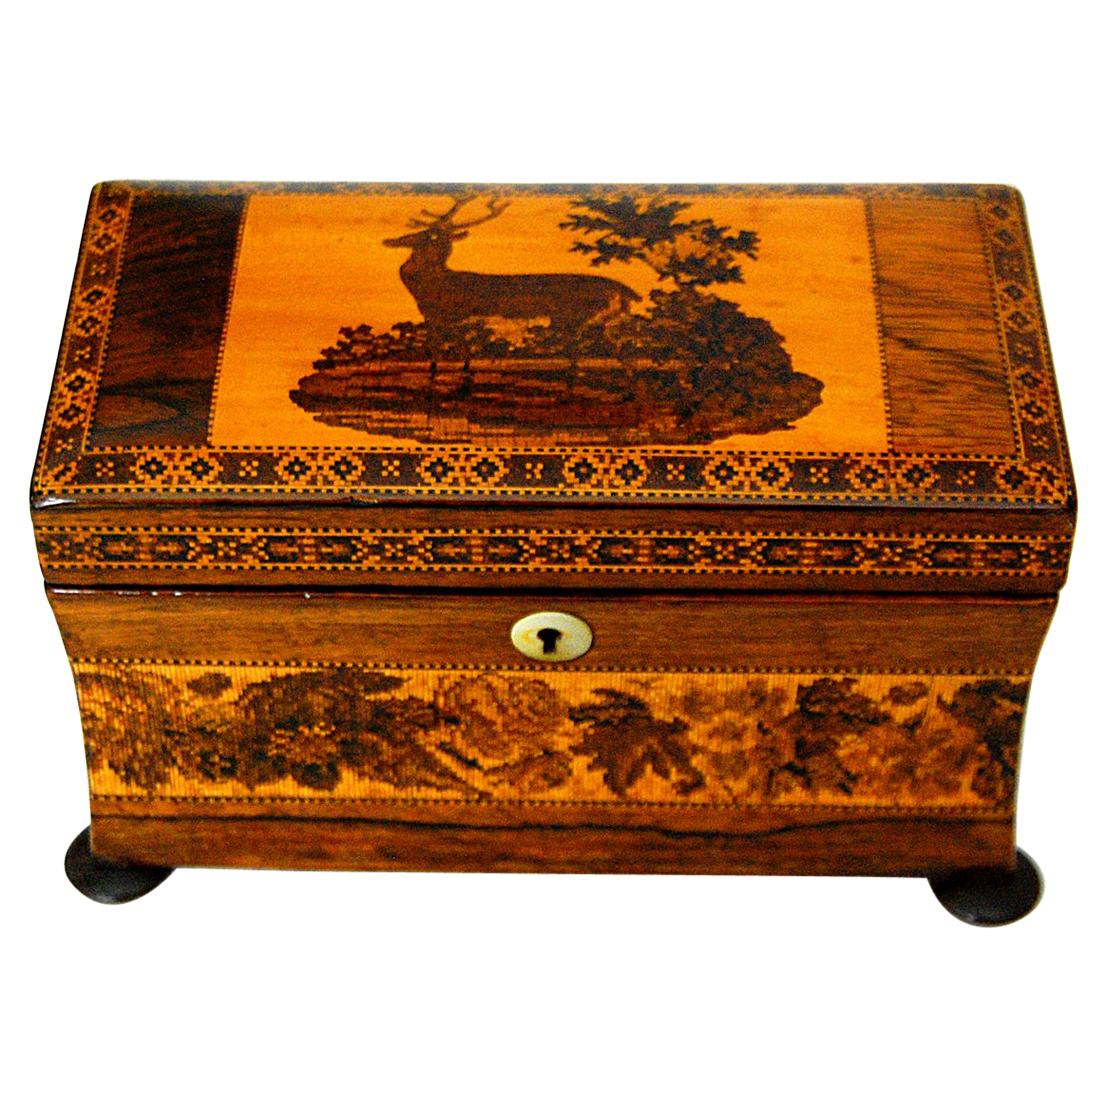 English Mid 19th Century Rosewood Tunbridge Inlaid Teacaddy with Deer and Fawn